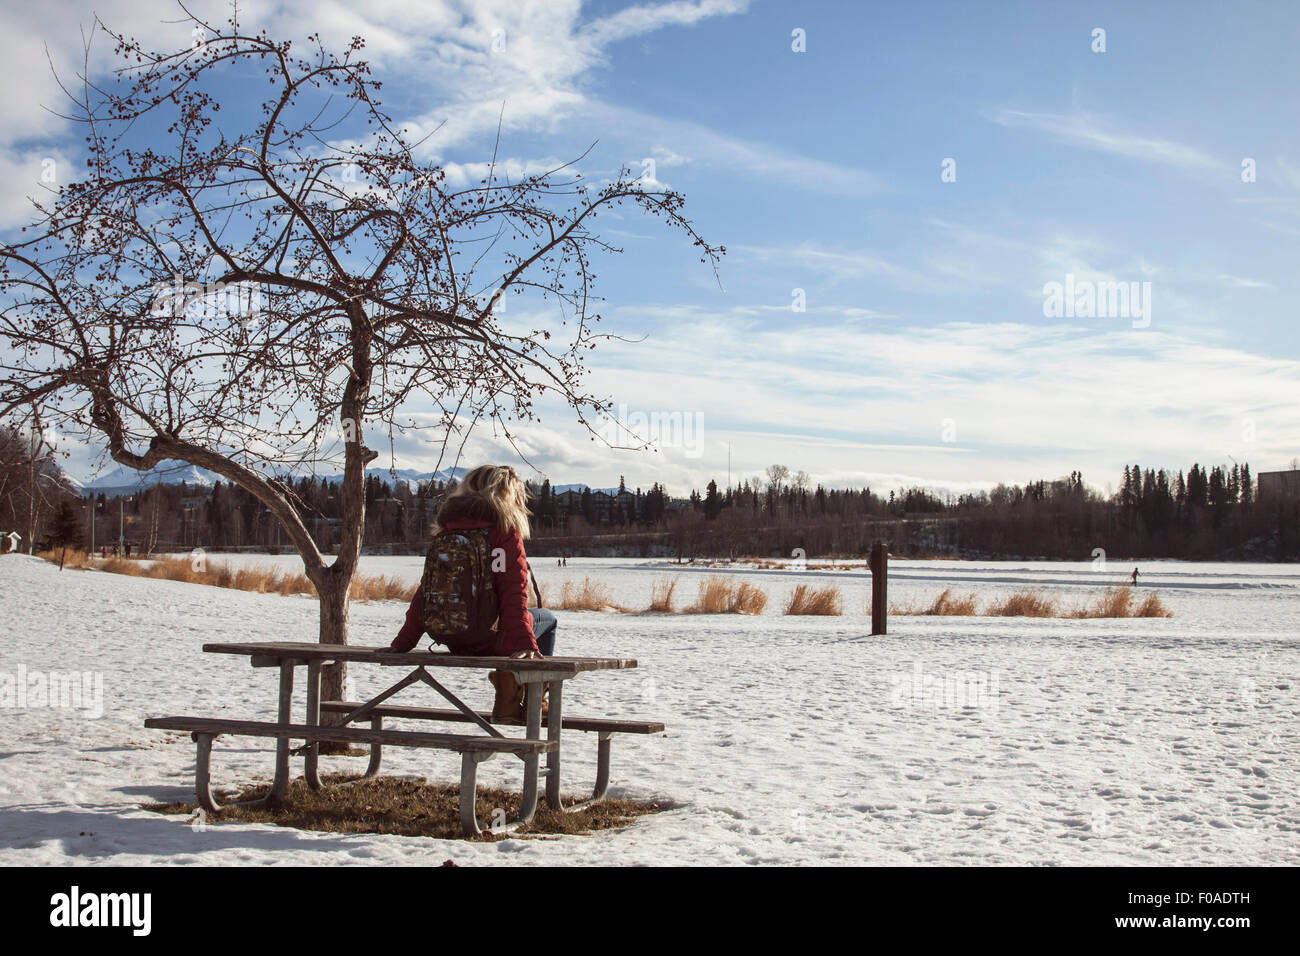 Young woman sitting on picnic bench, Anchorage, Alaska Stock Photo